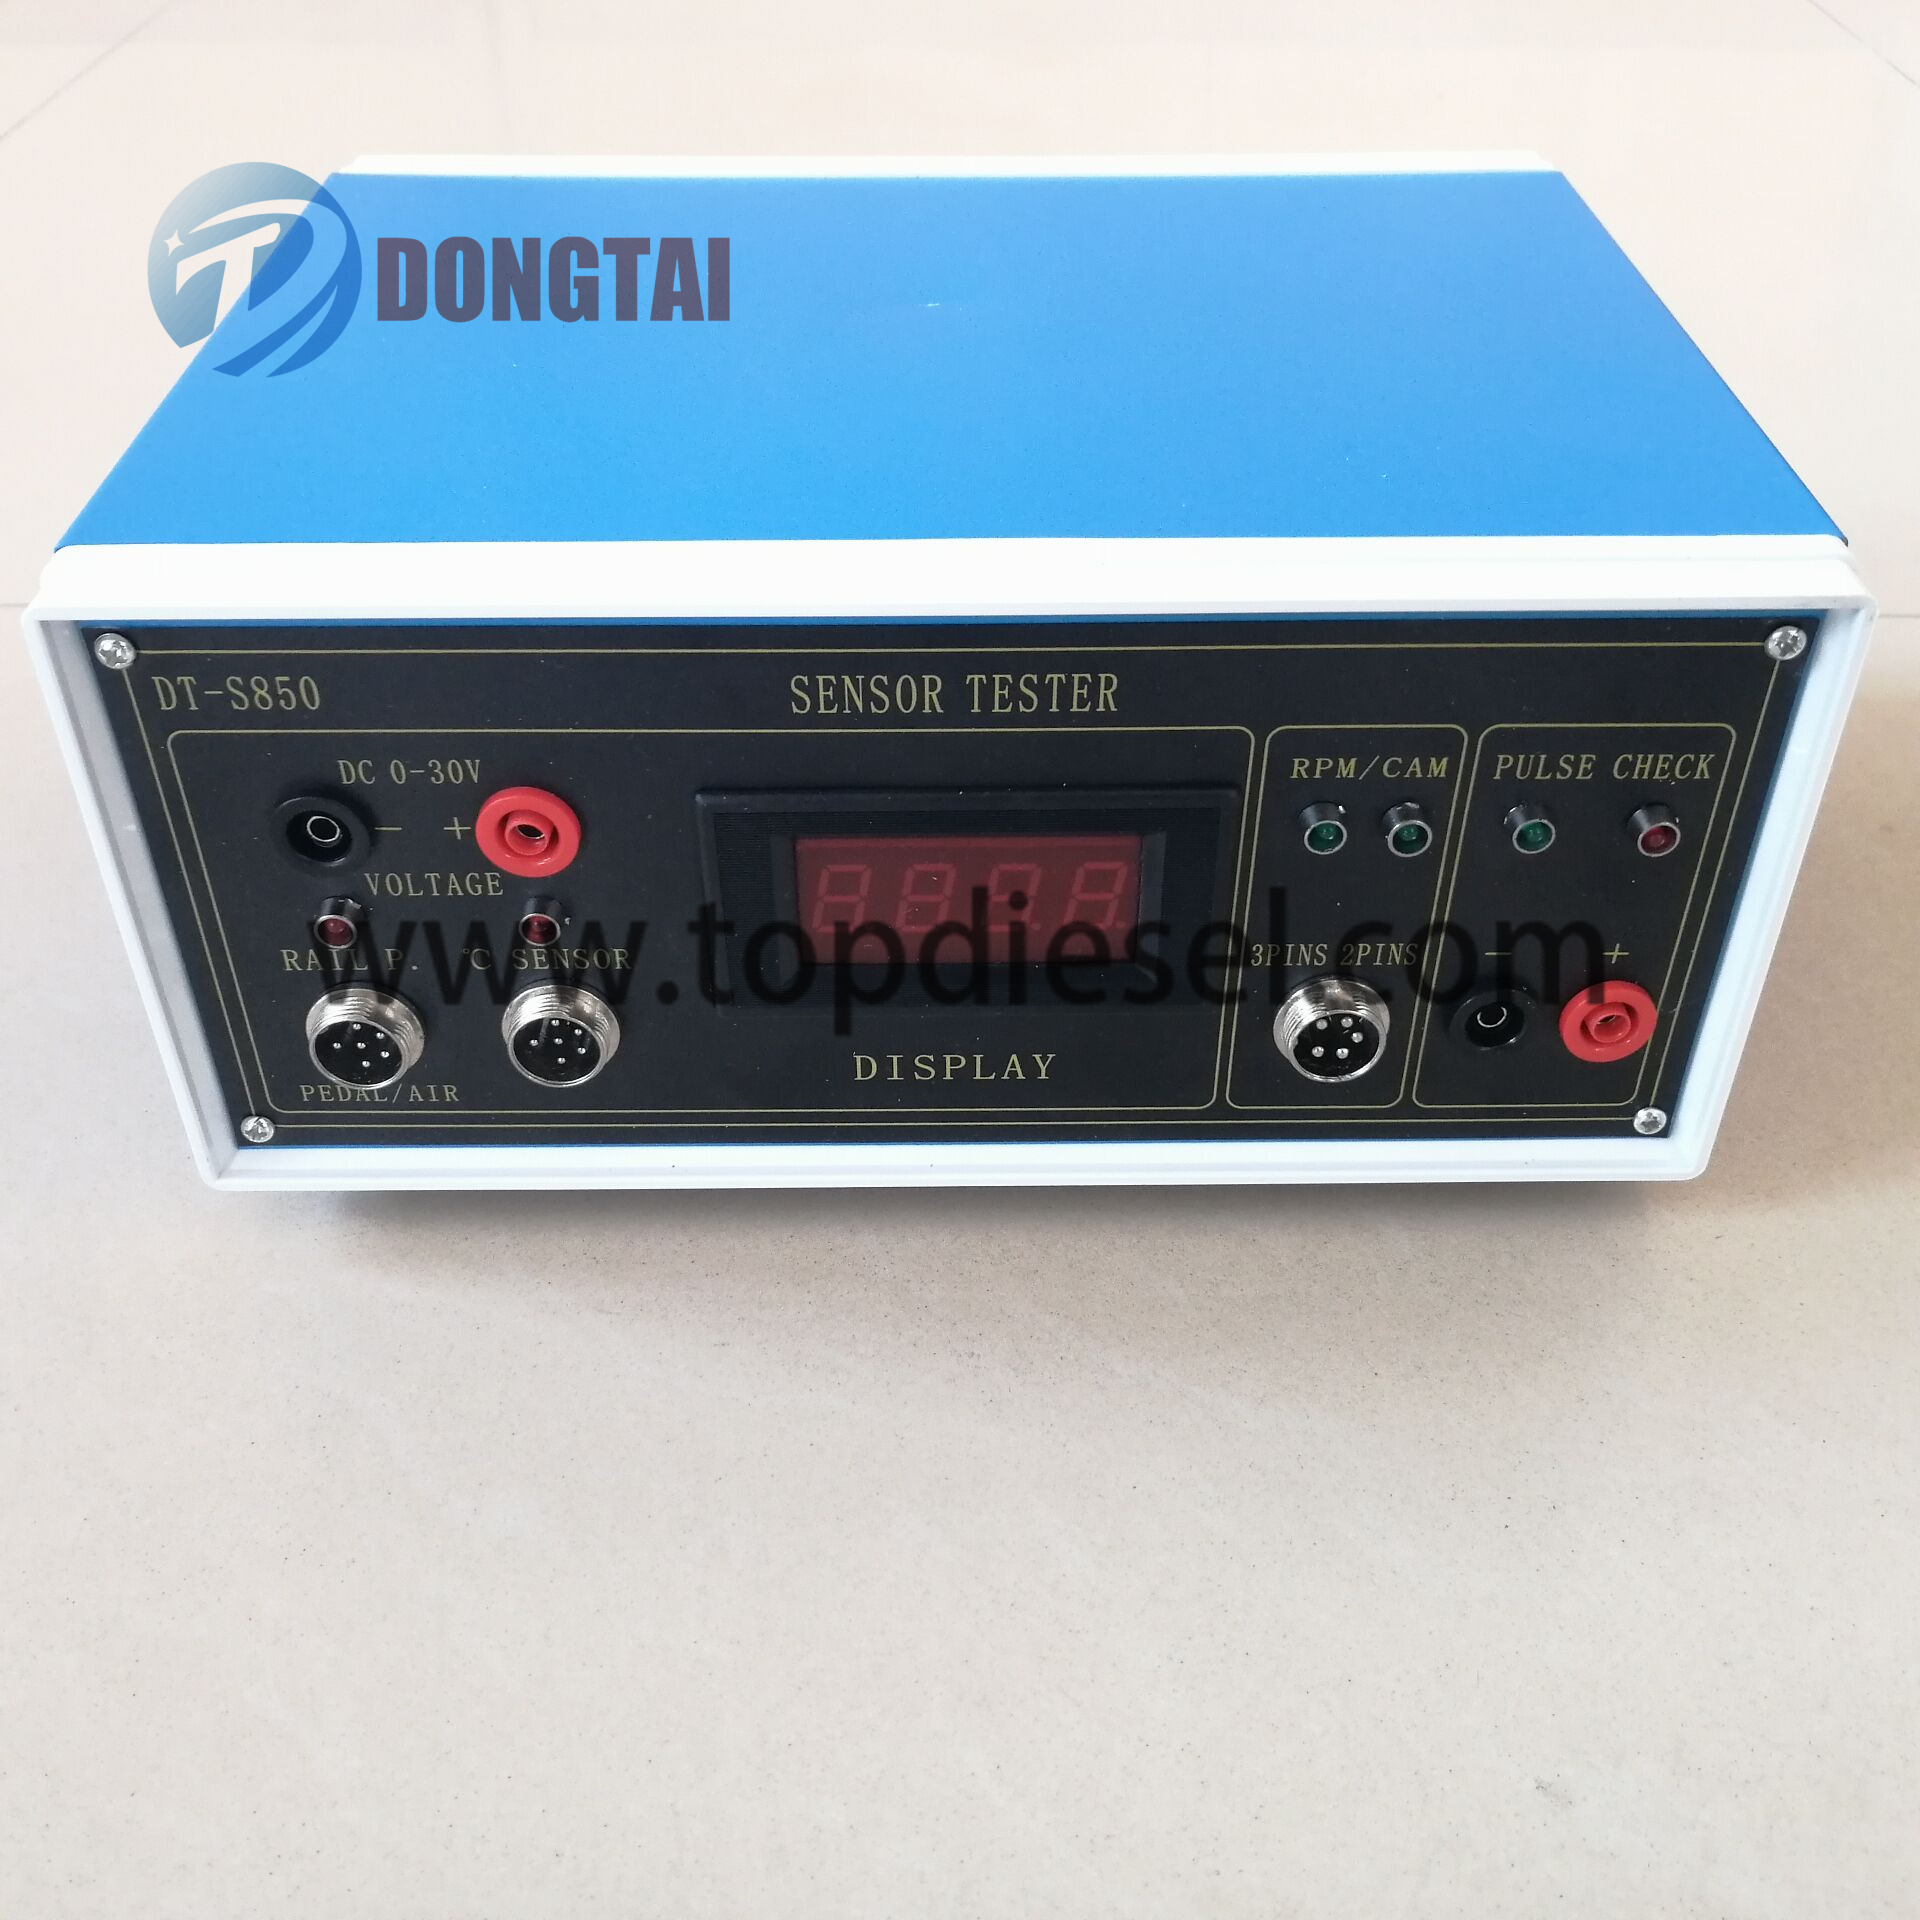 Low price for 204 Shaft End Cover – Pump Cover - DT-S850 Sensor Tester – Dongtai